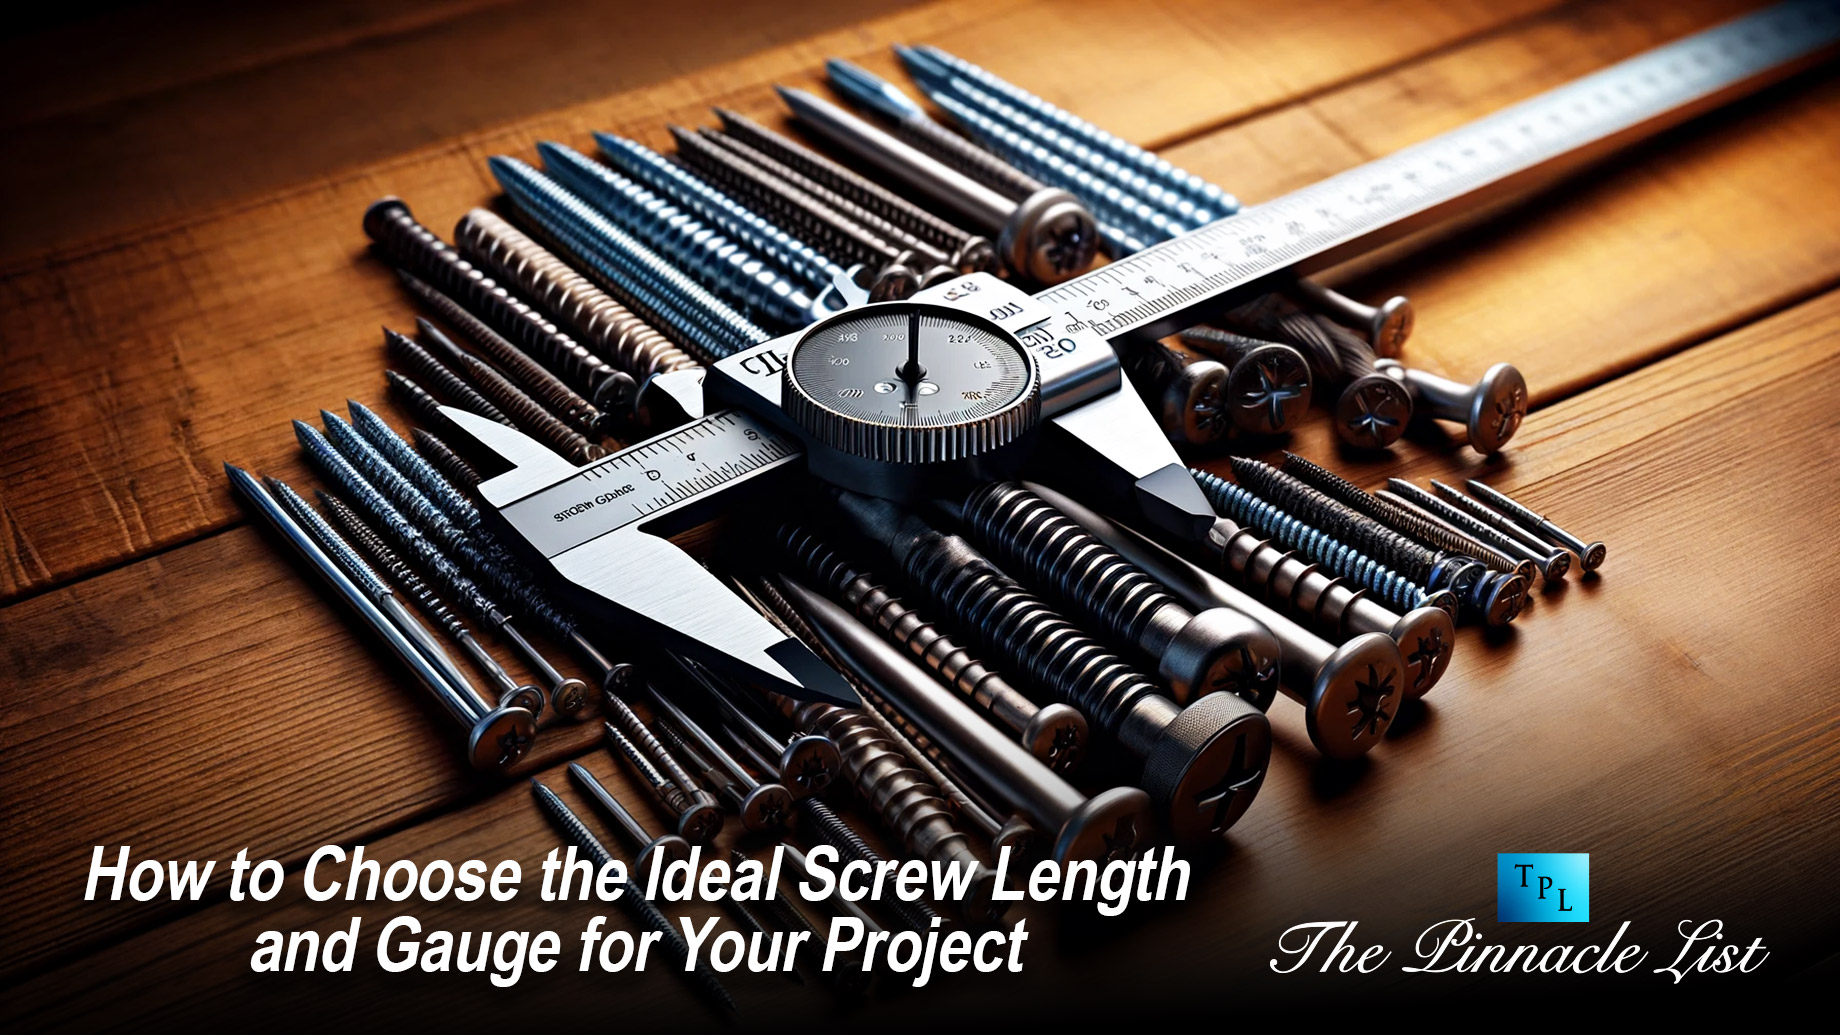 How to Choose the Ideal Screw Length and Gauge for Your Project